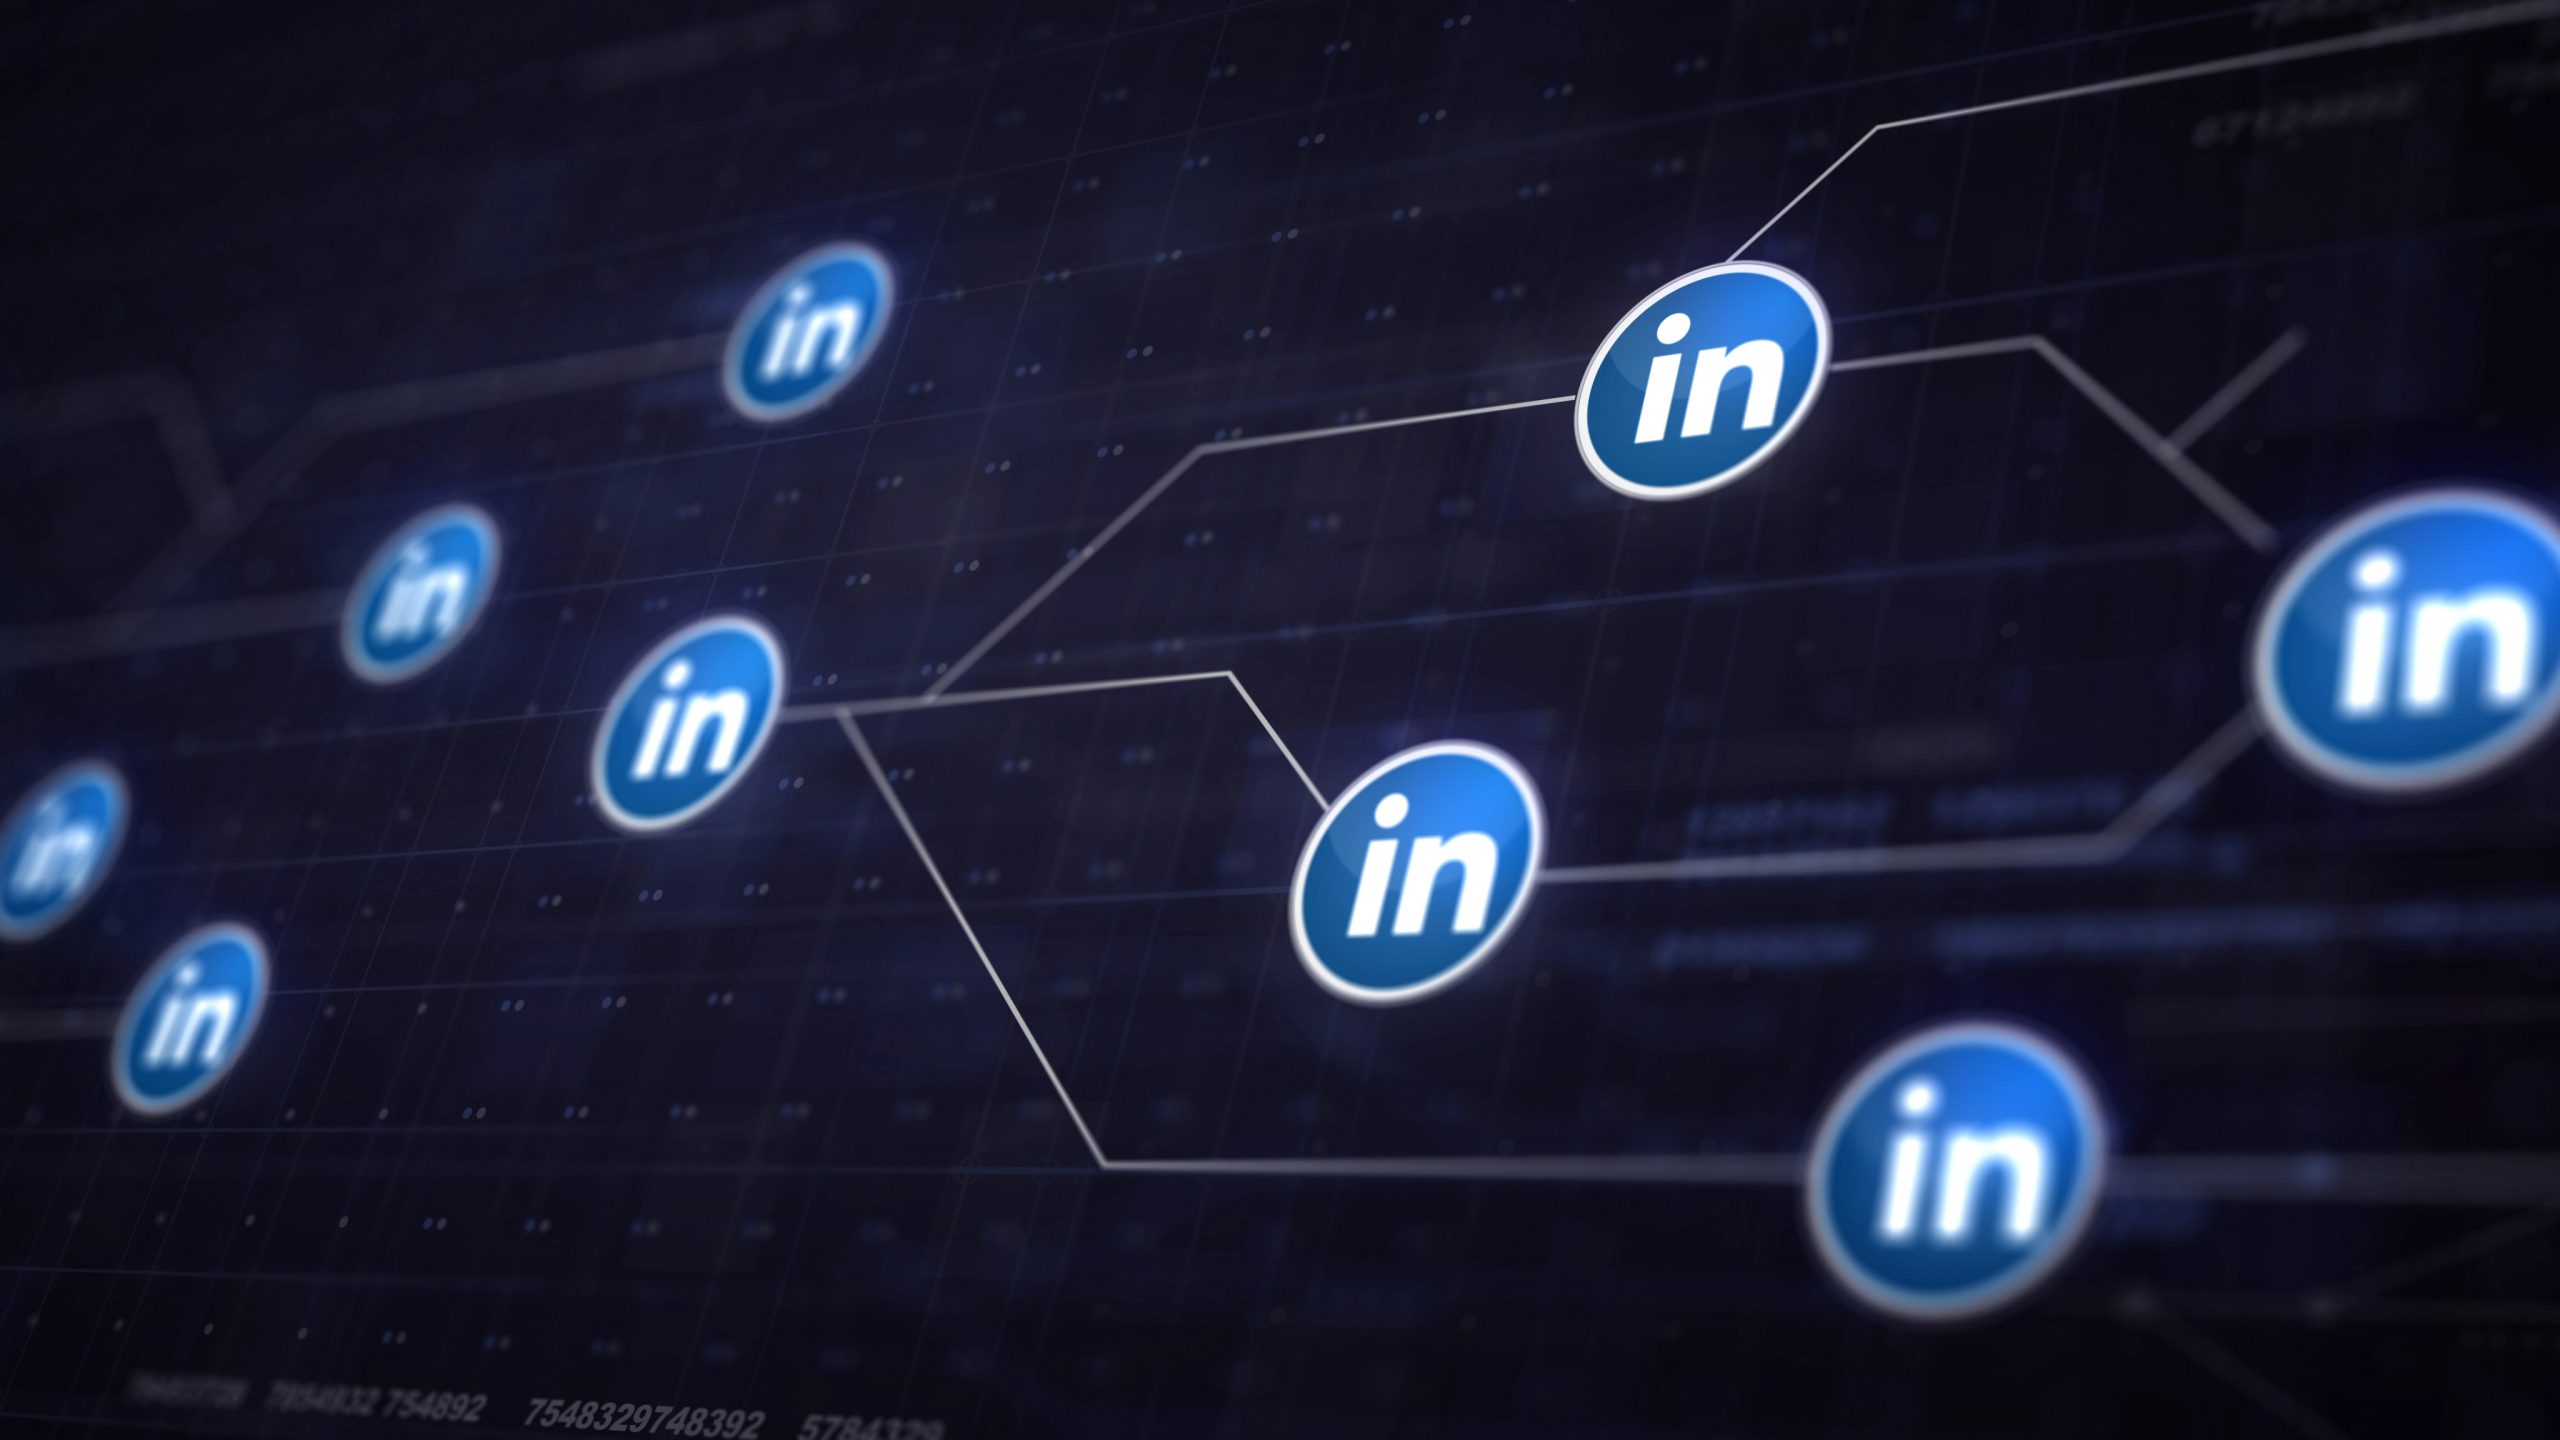 How To Use Linkedin For Marketing